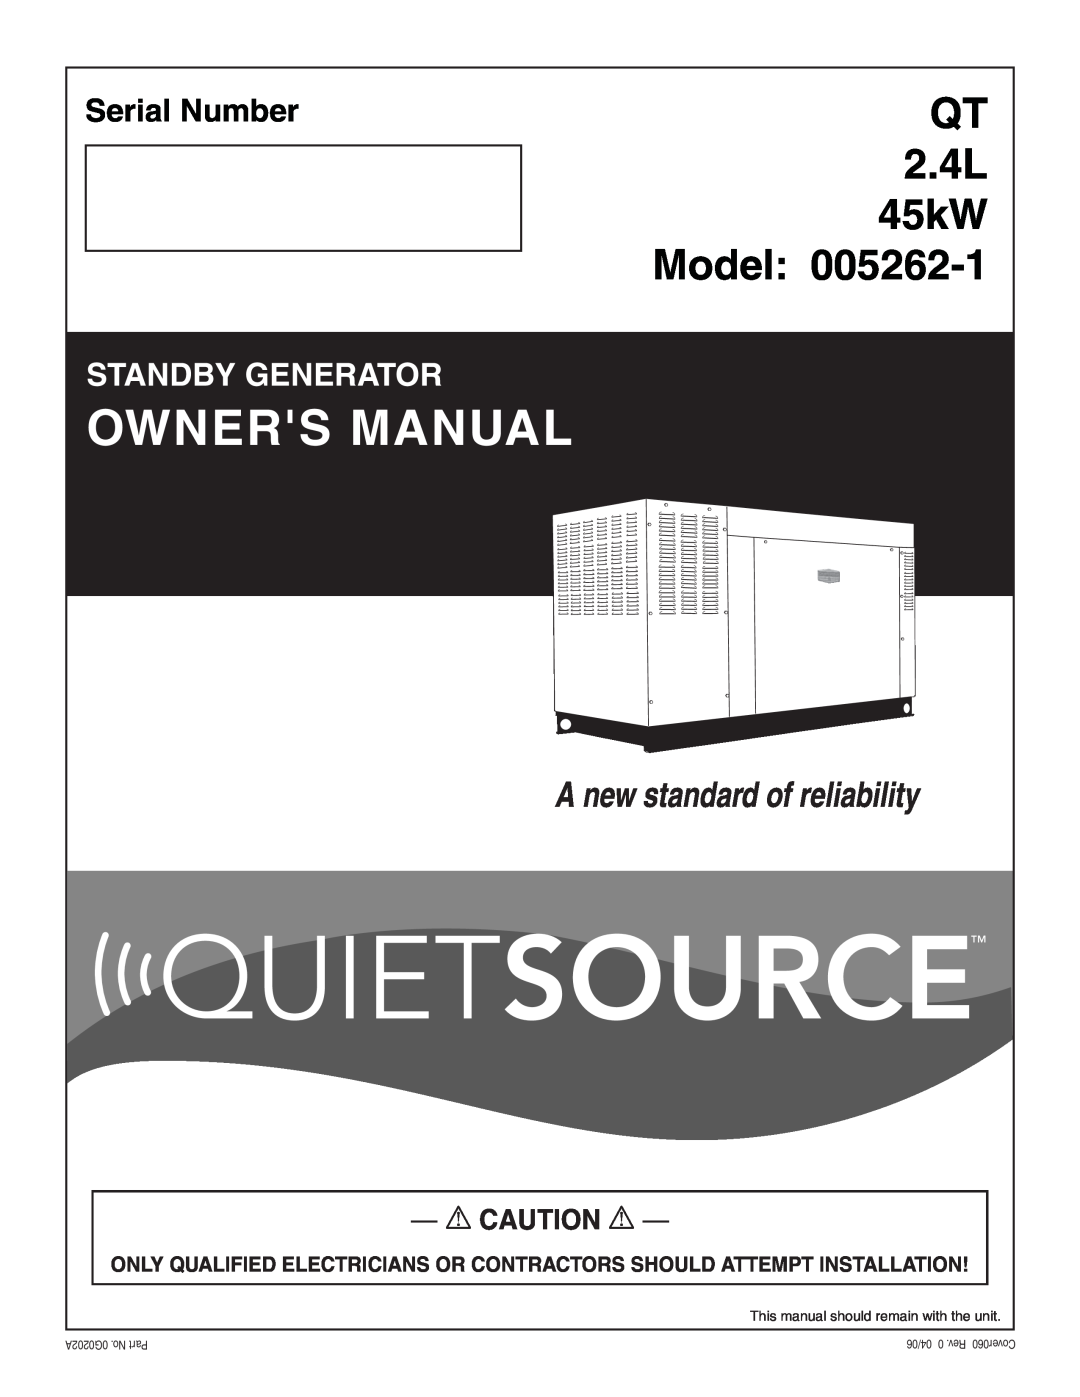 Generac Power Systems 005262-1 owner manual Owners Manual, Model, QT 2.4L 45kW, A new standard of reliability 